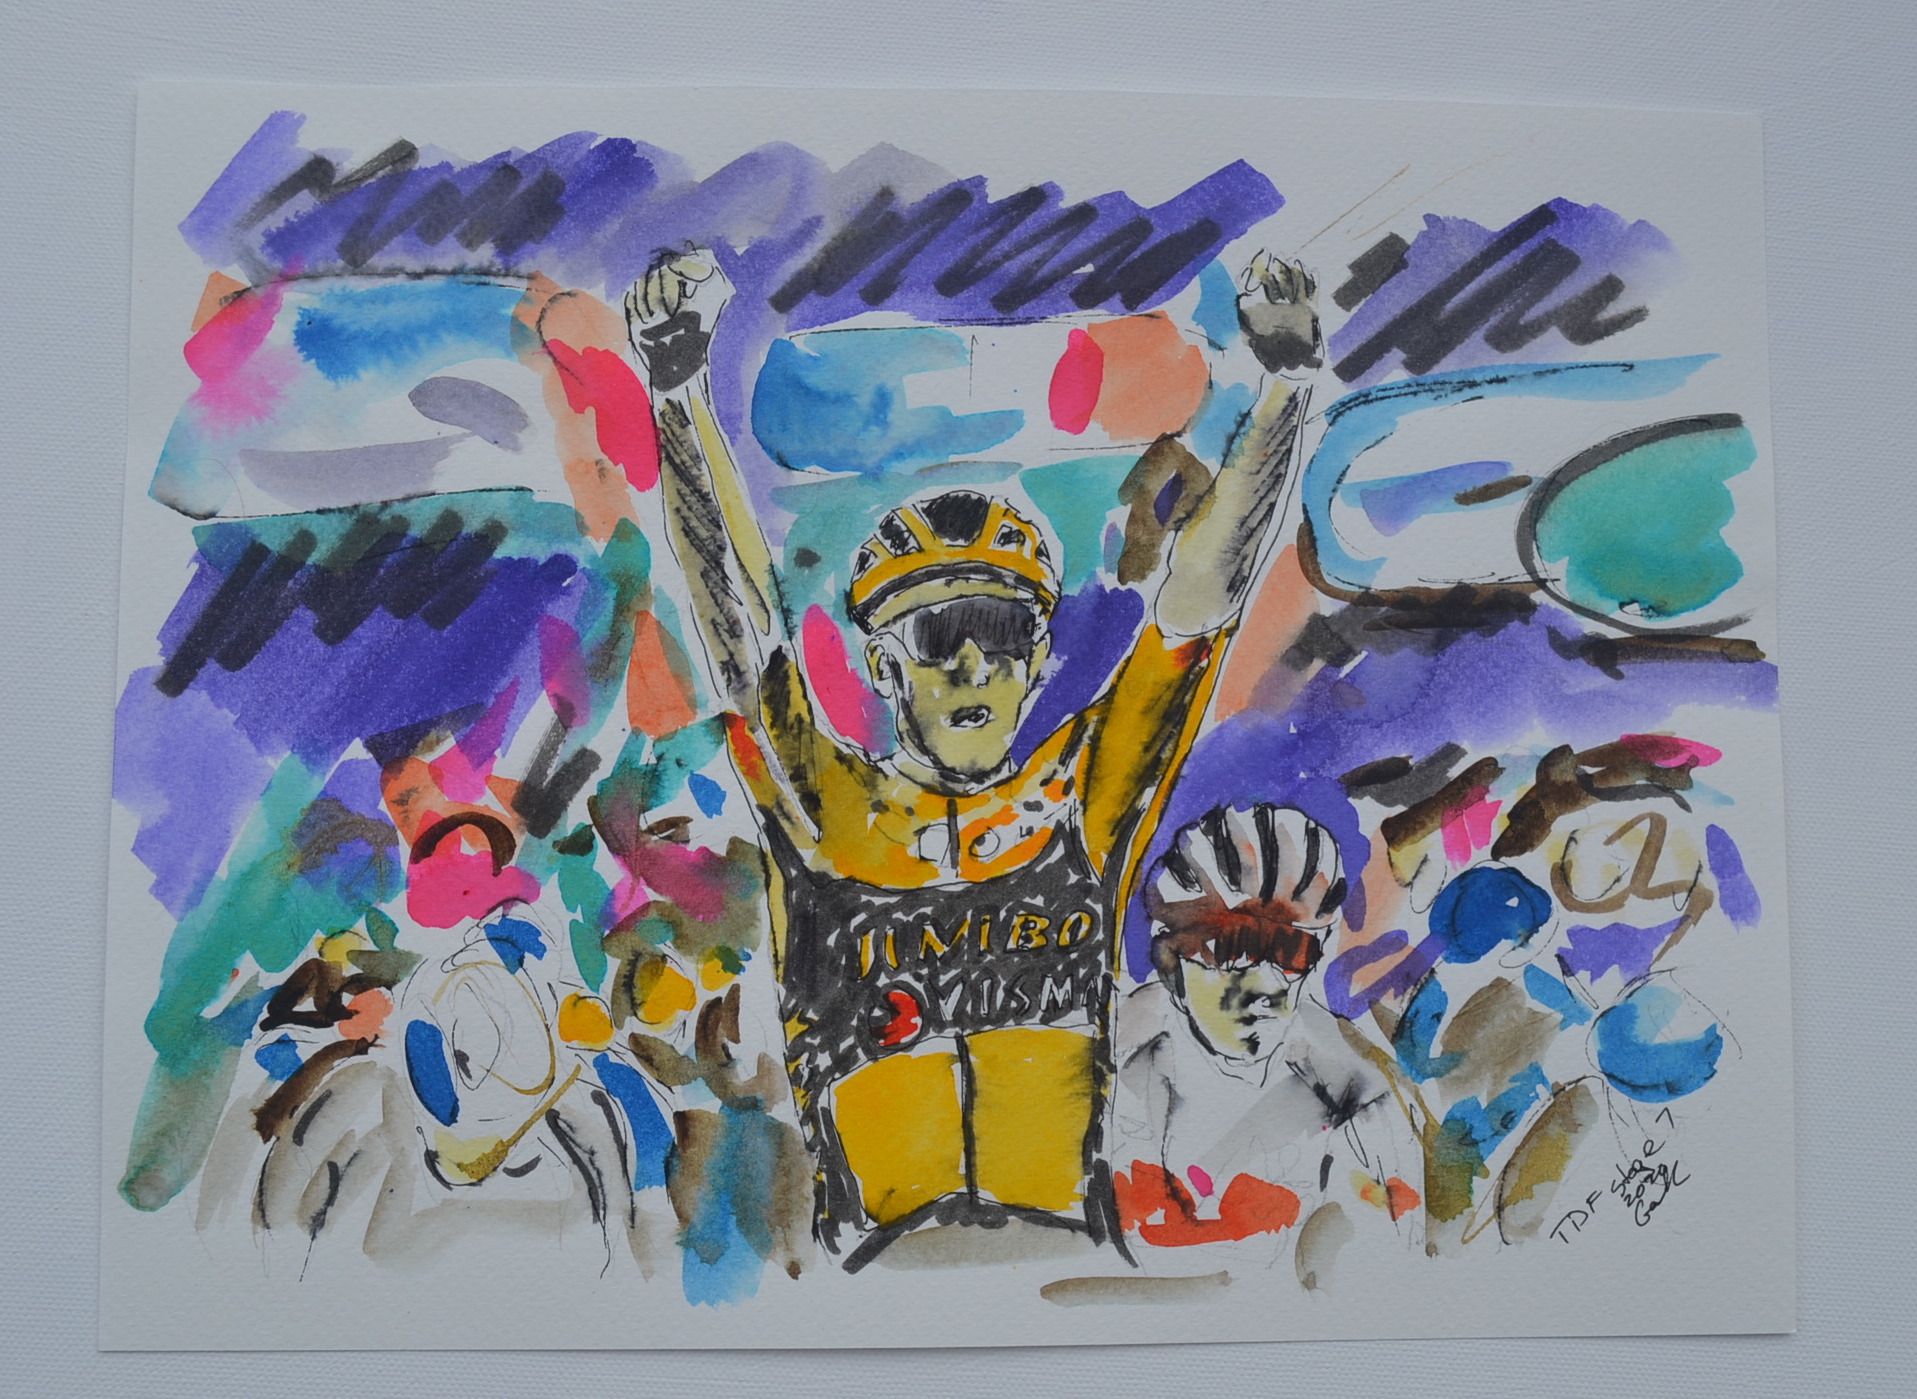 Tour de France Stage 7 by Garth Bayley - Secondary Image